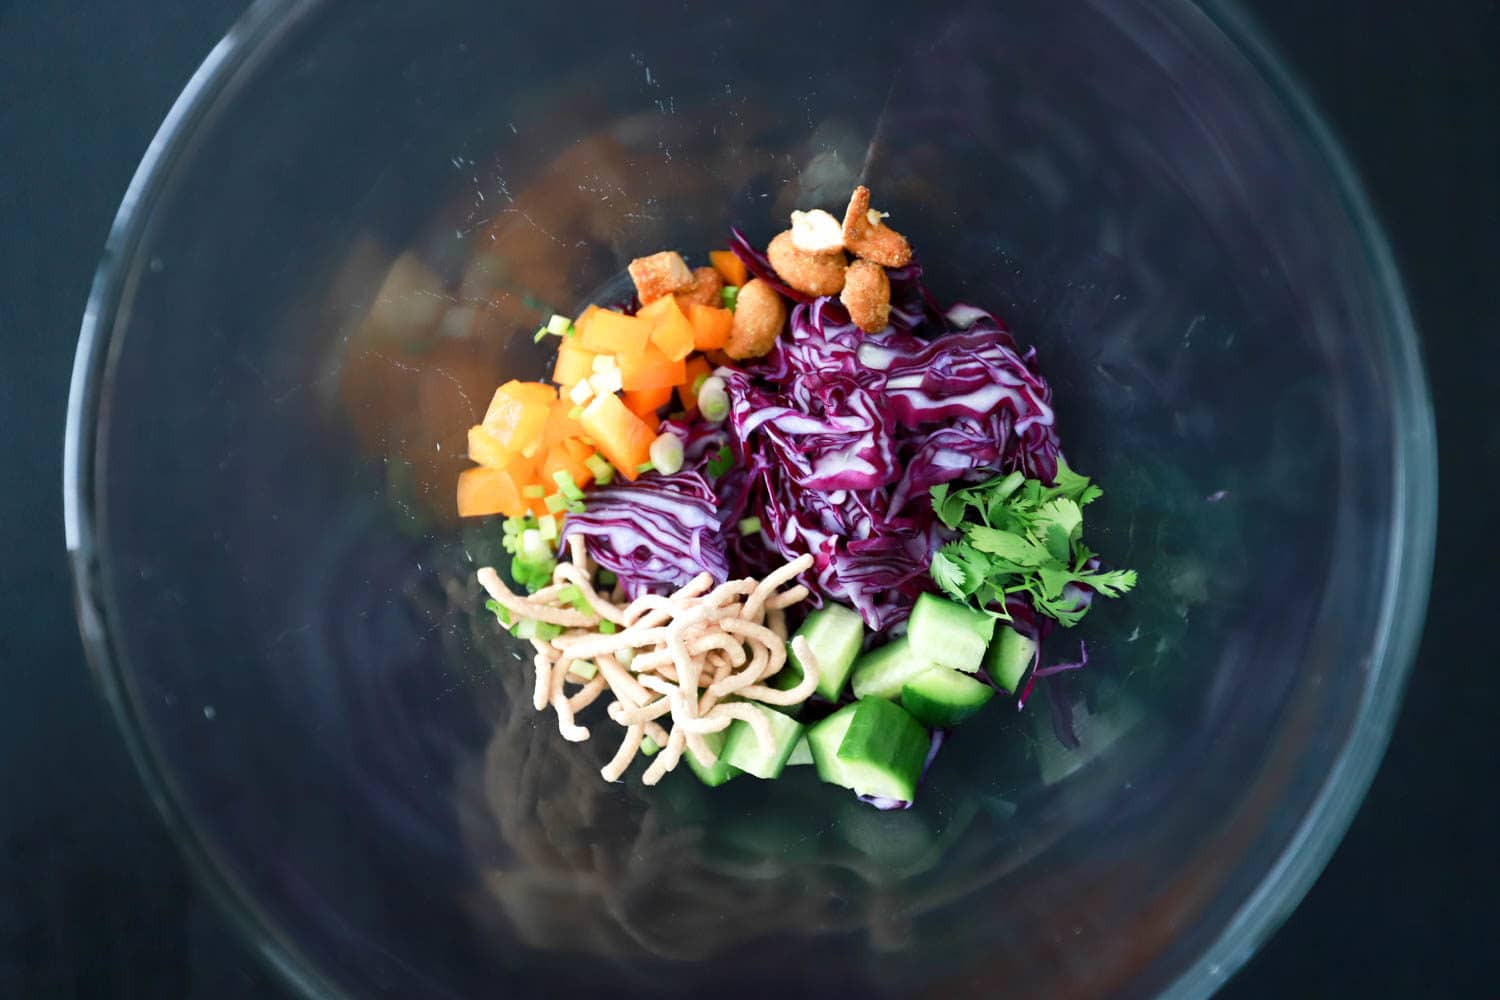 Spicy Peanut Sauce with red cabbage chopped salad. Perfect for meal prepping!